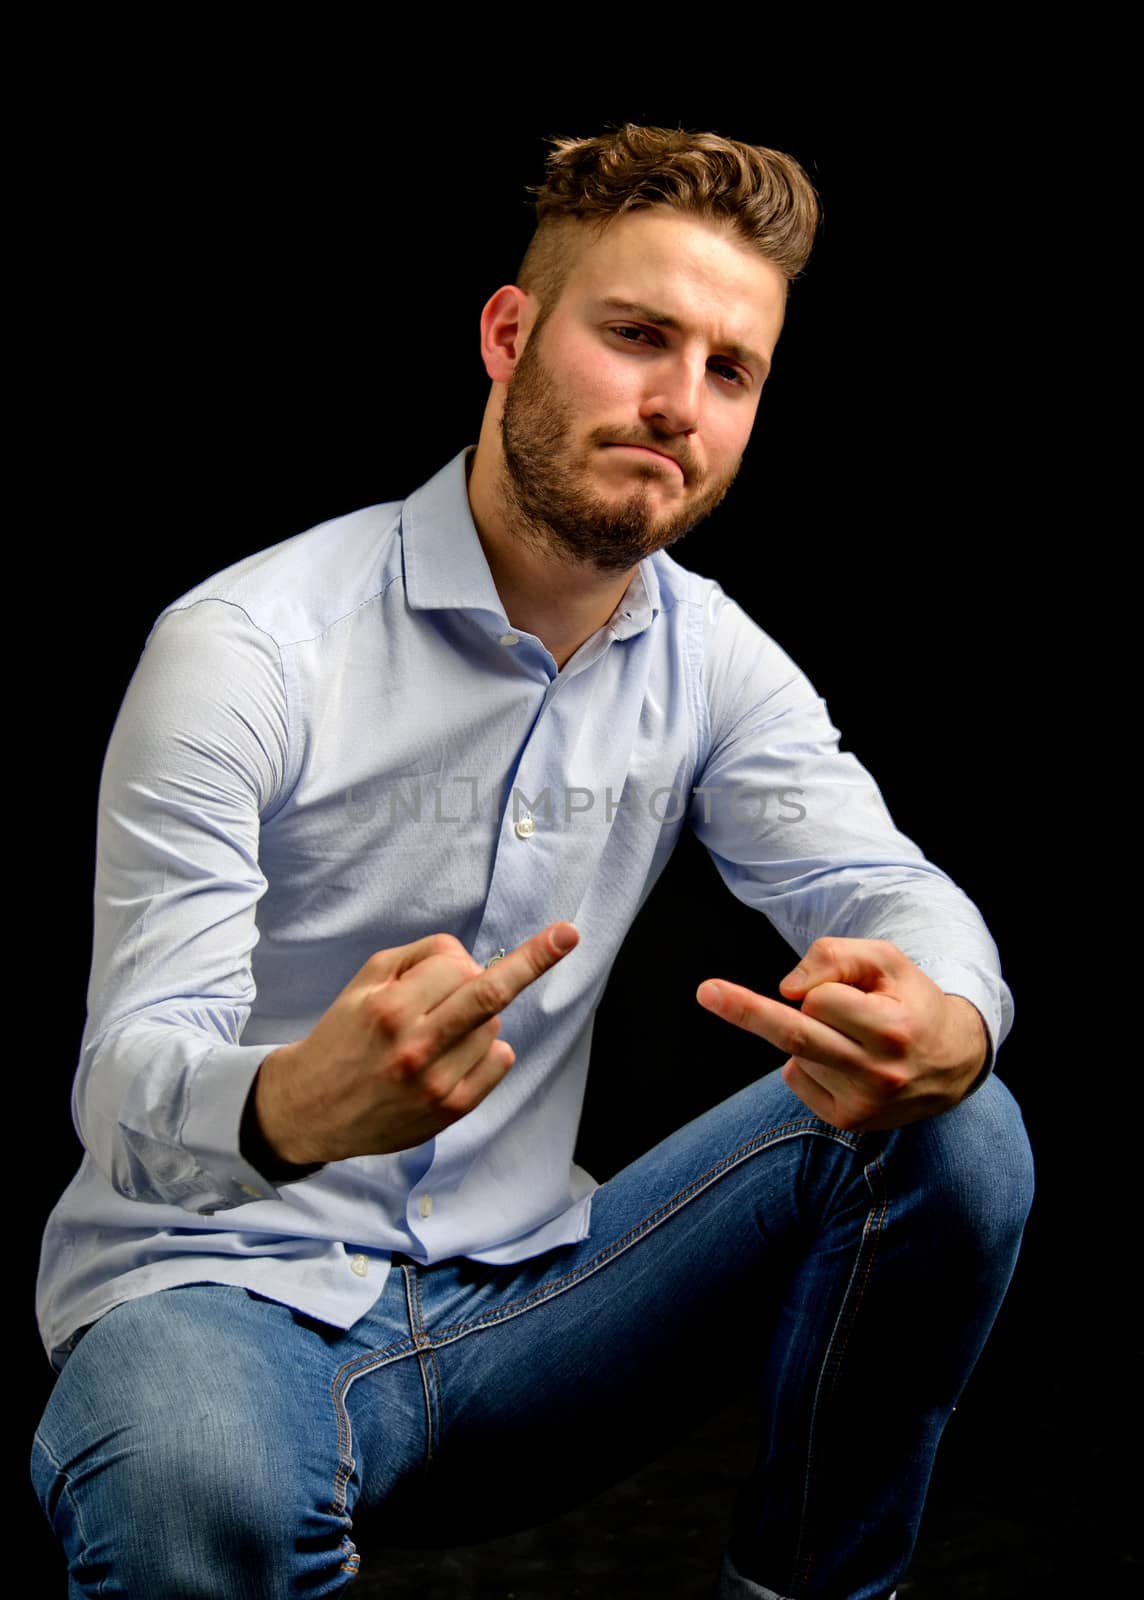 Friendly young man doing 'fuck you' gesture with middle fingers, isolated on black background